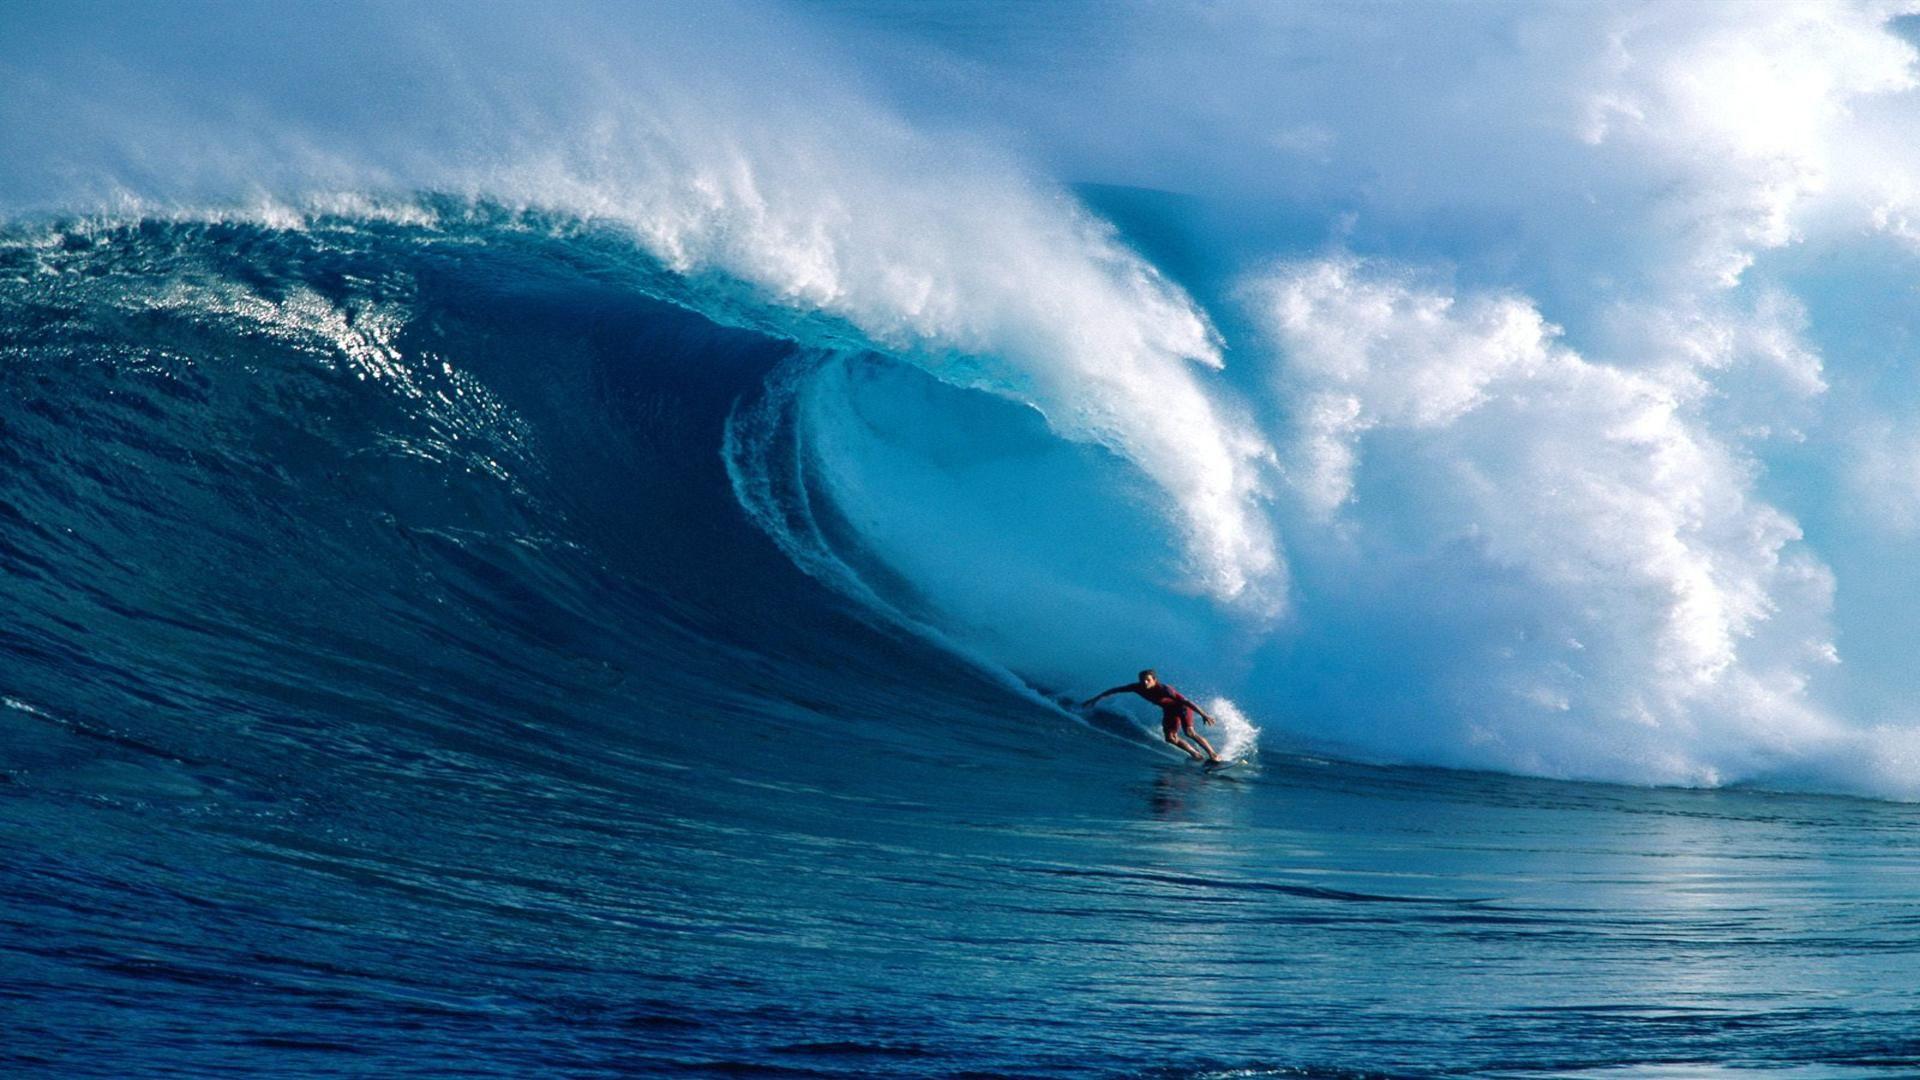 Top Sport Hawaii Surfing Wallpapers Images for Pinterest